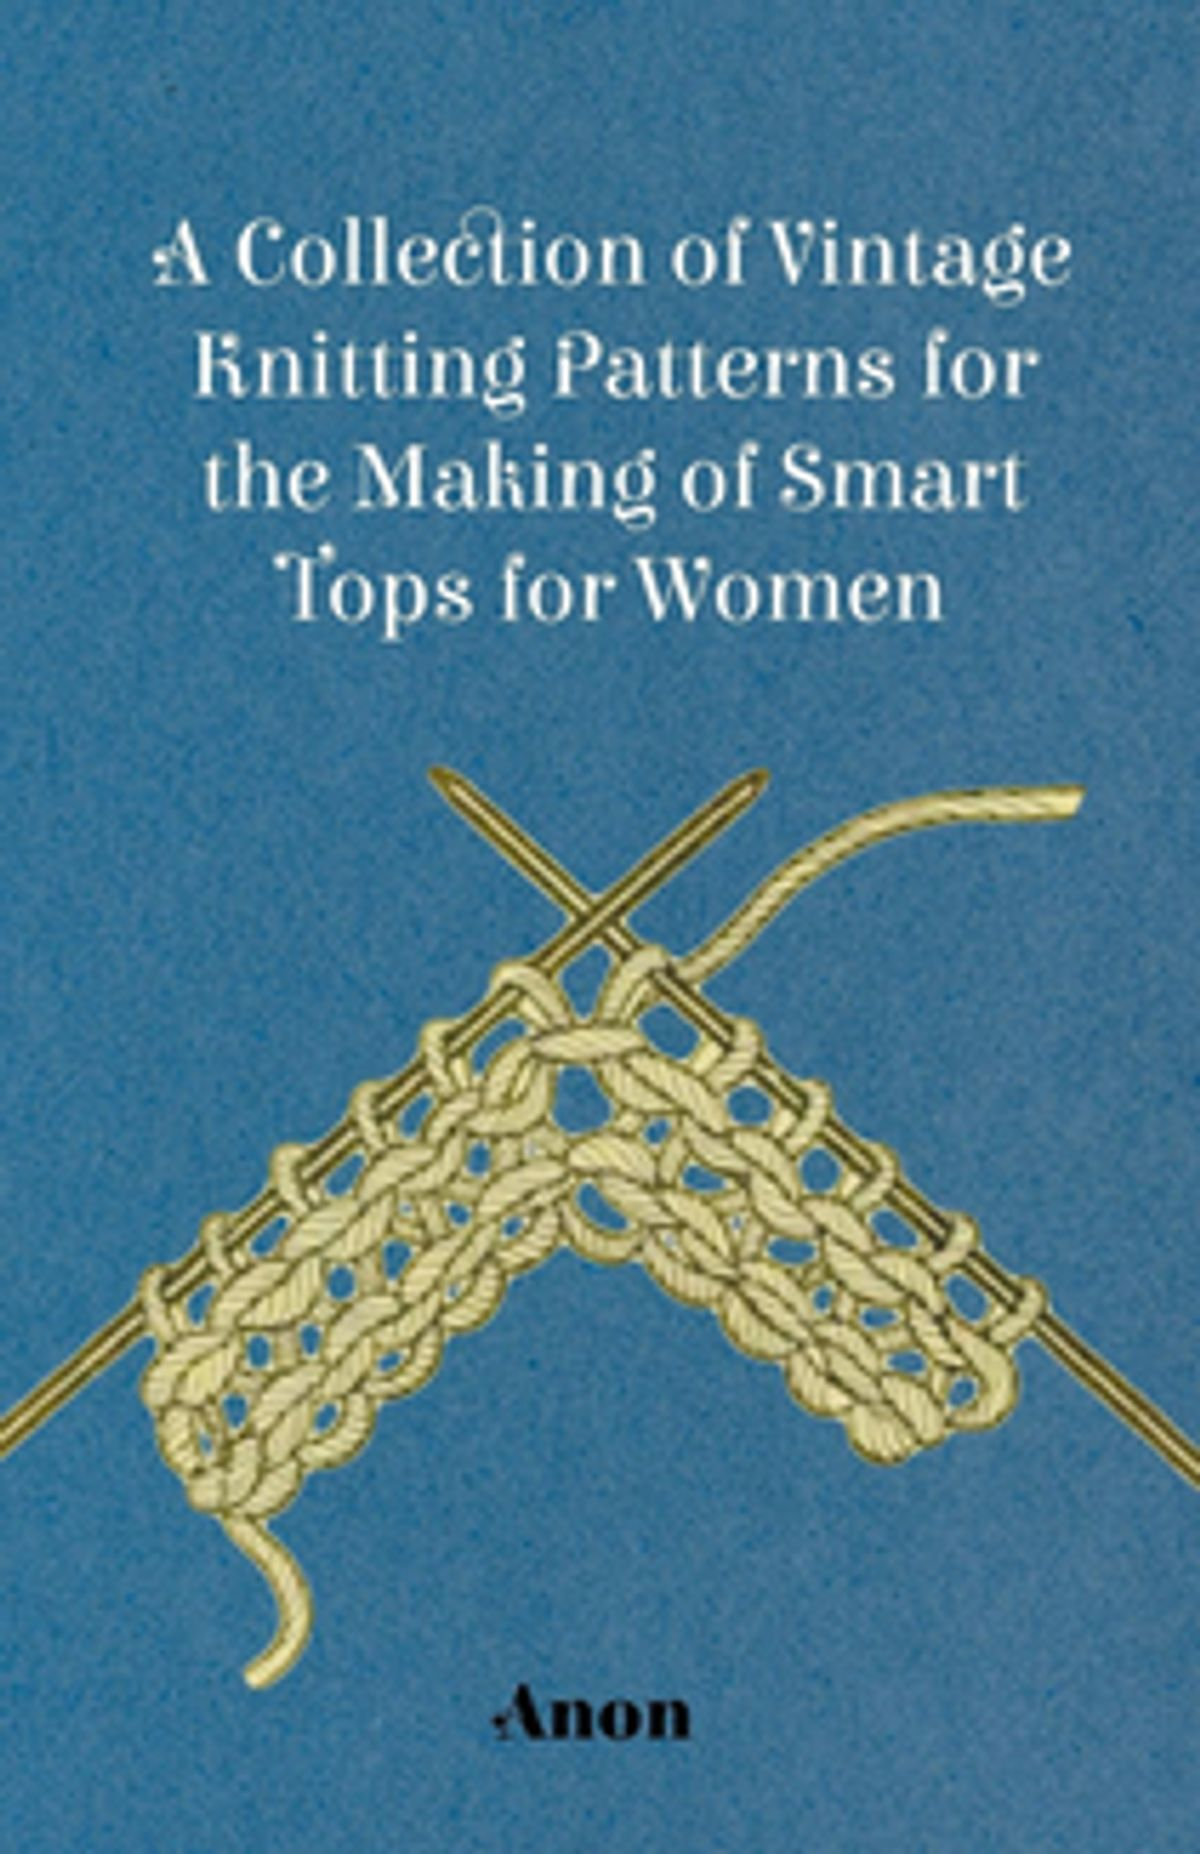 Knitting Patterns A Collection Of Vintage Knitting Patterns For The Making Of Smart Tops For Women Ebook Anon Rakuten Kobo